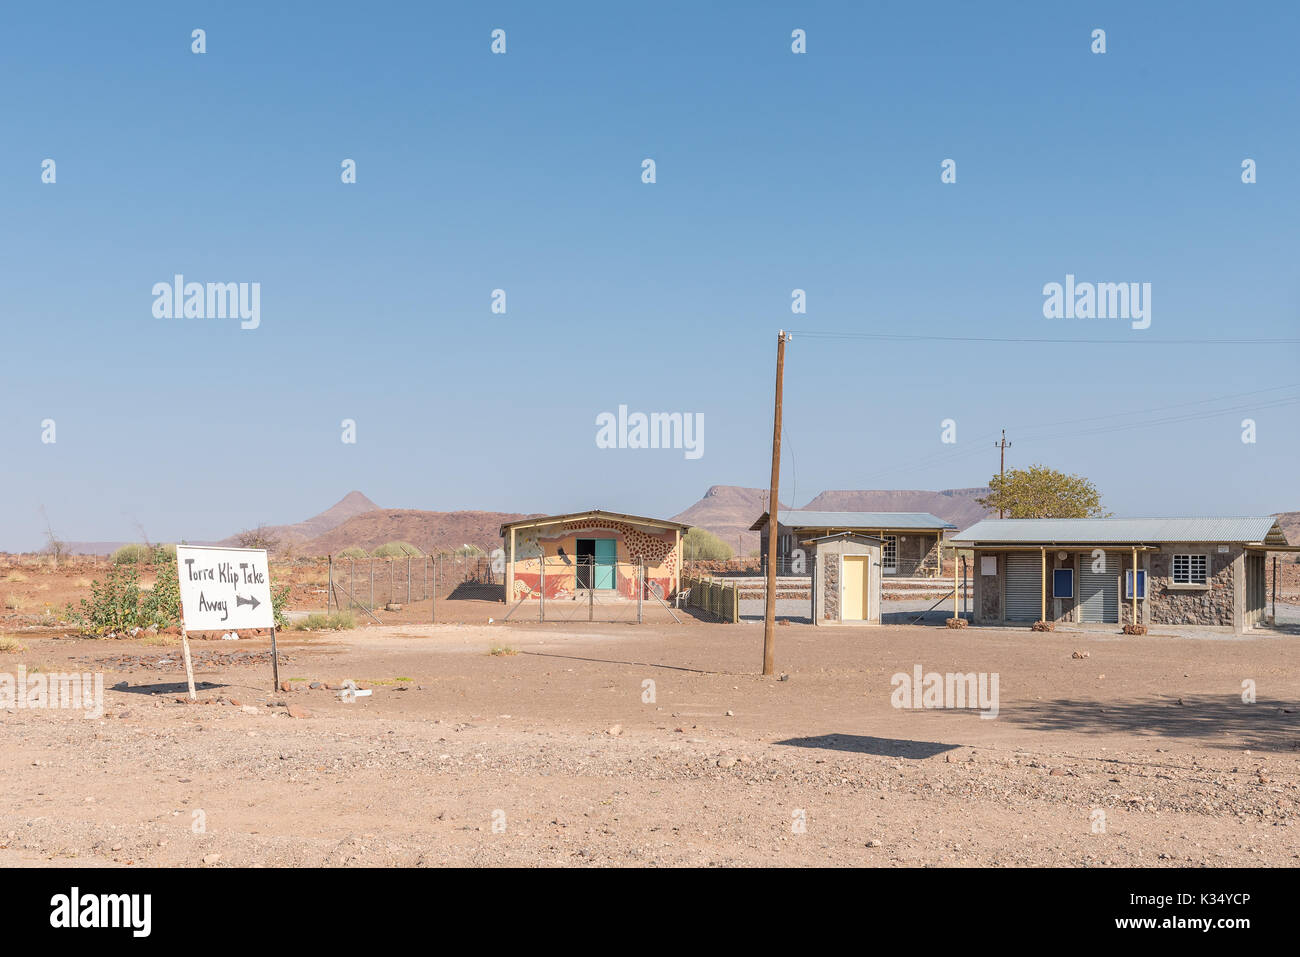 BERGSIG, NAMIBIA - JUNE 28, 2017: A shop selling gemstones in Bergsig, a small village in the Kunene Region of Namibia Stock Photo